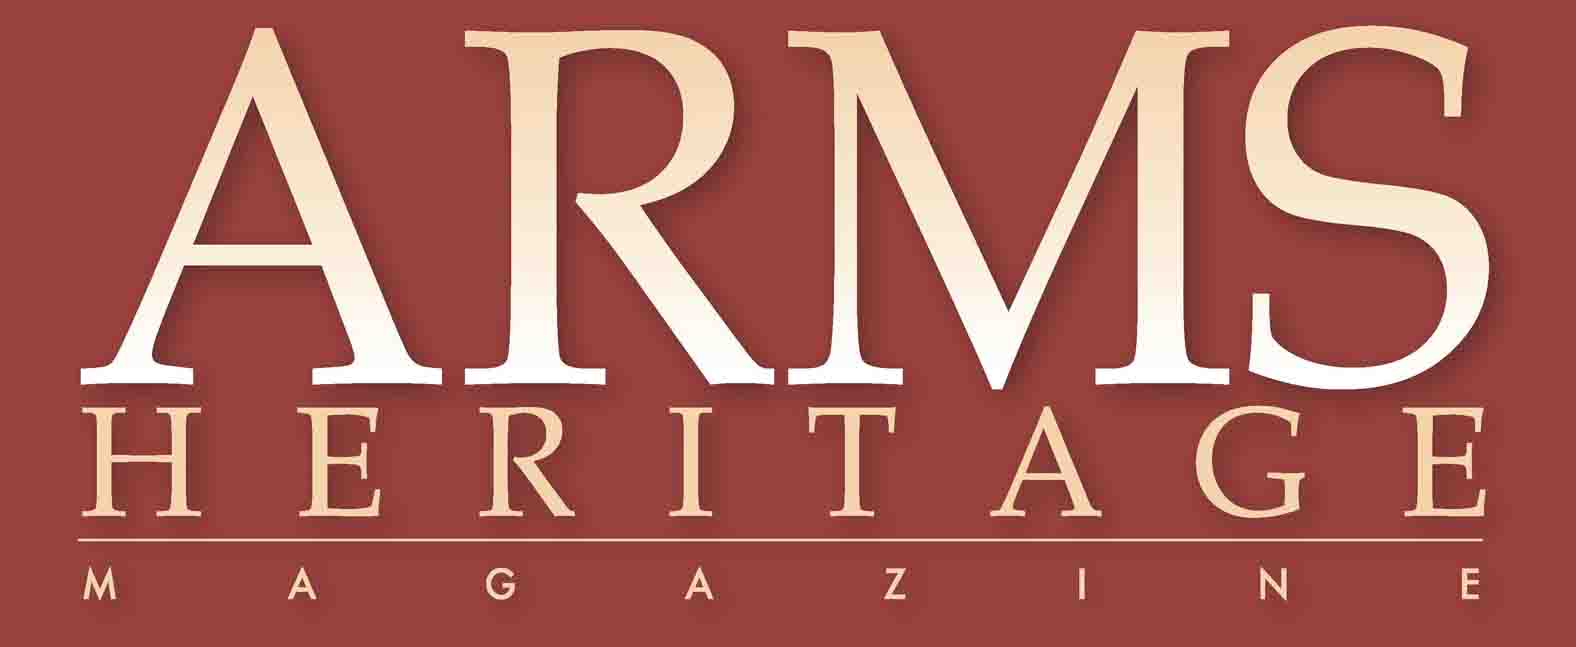 ARMS HERITAGE MAGAZINE - Volume 3, All Six Issues - GB-img-0